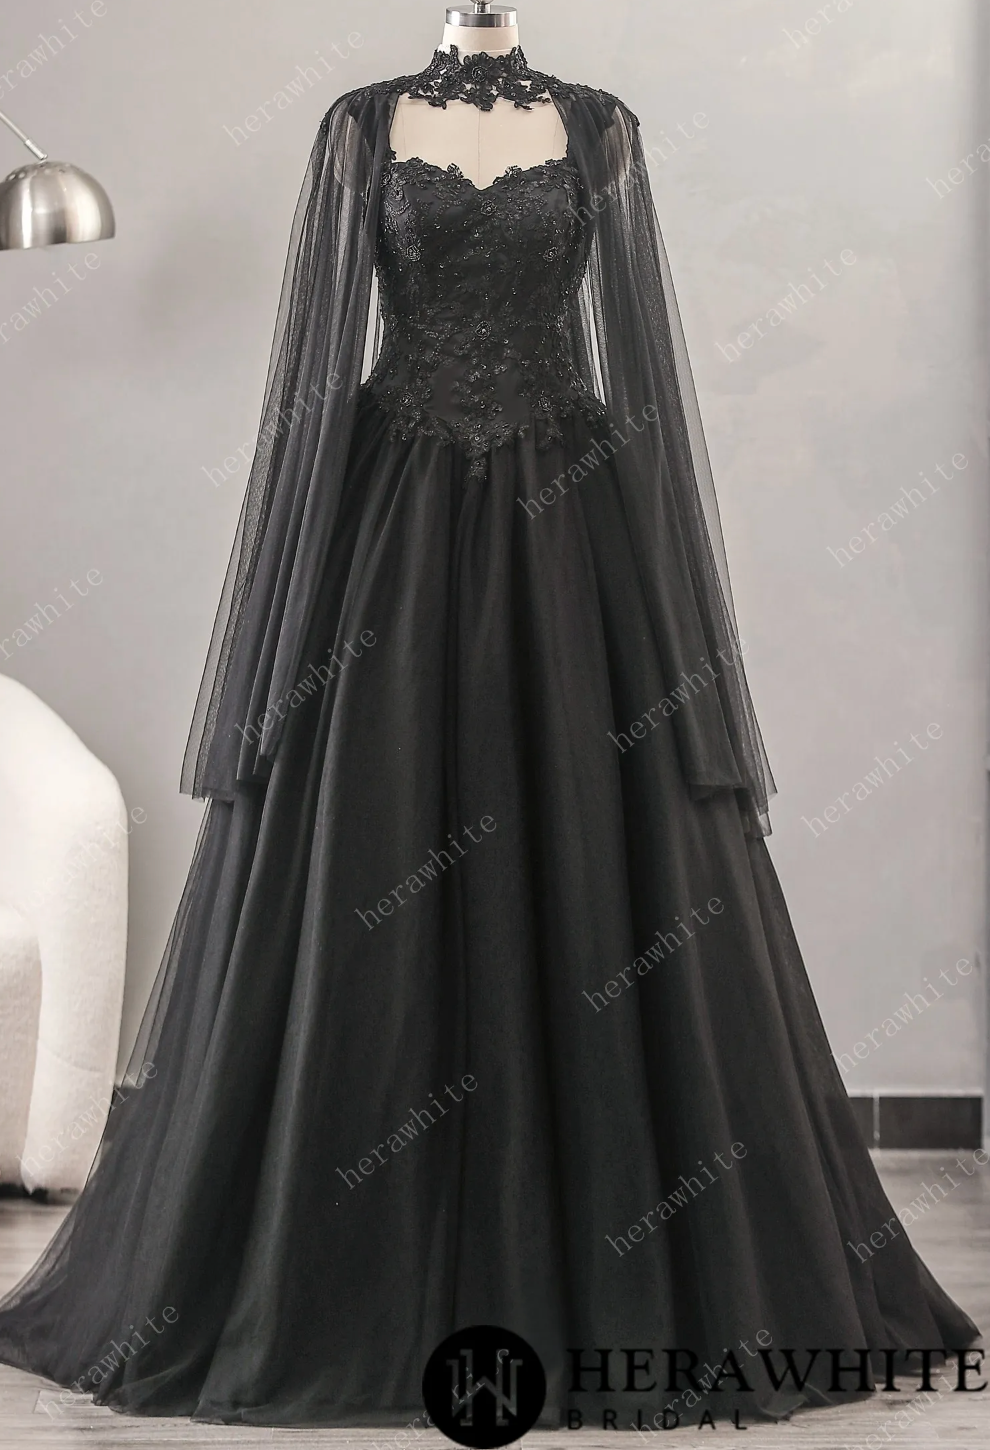 BRAND NEW Lace A-line black wedding dress lace-up 16/18 – Renegade